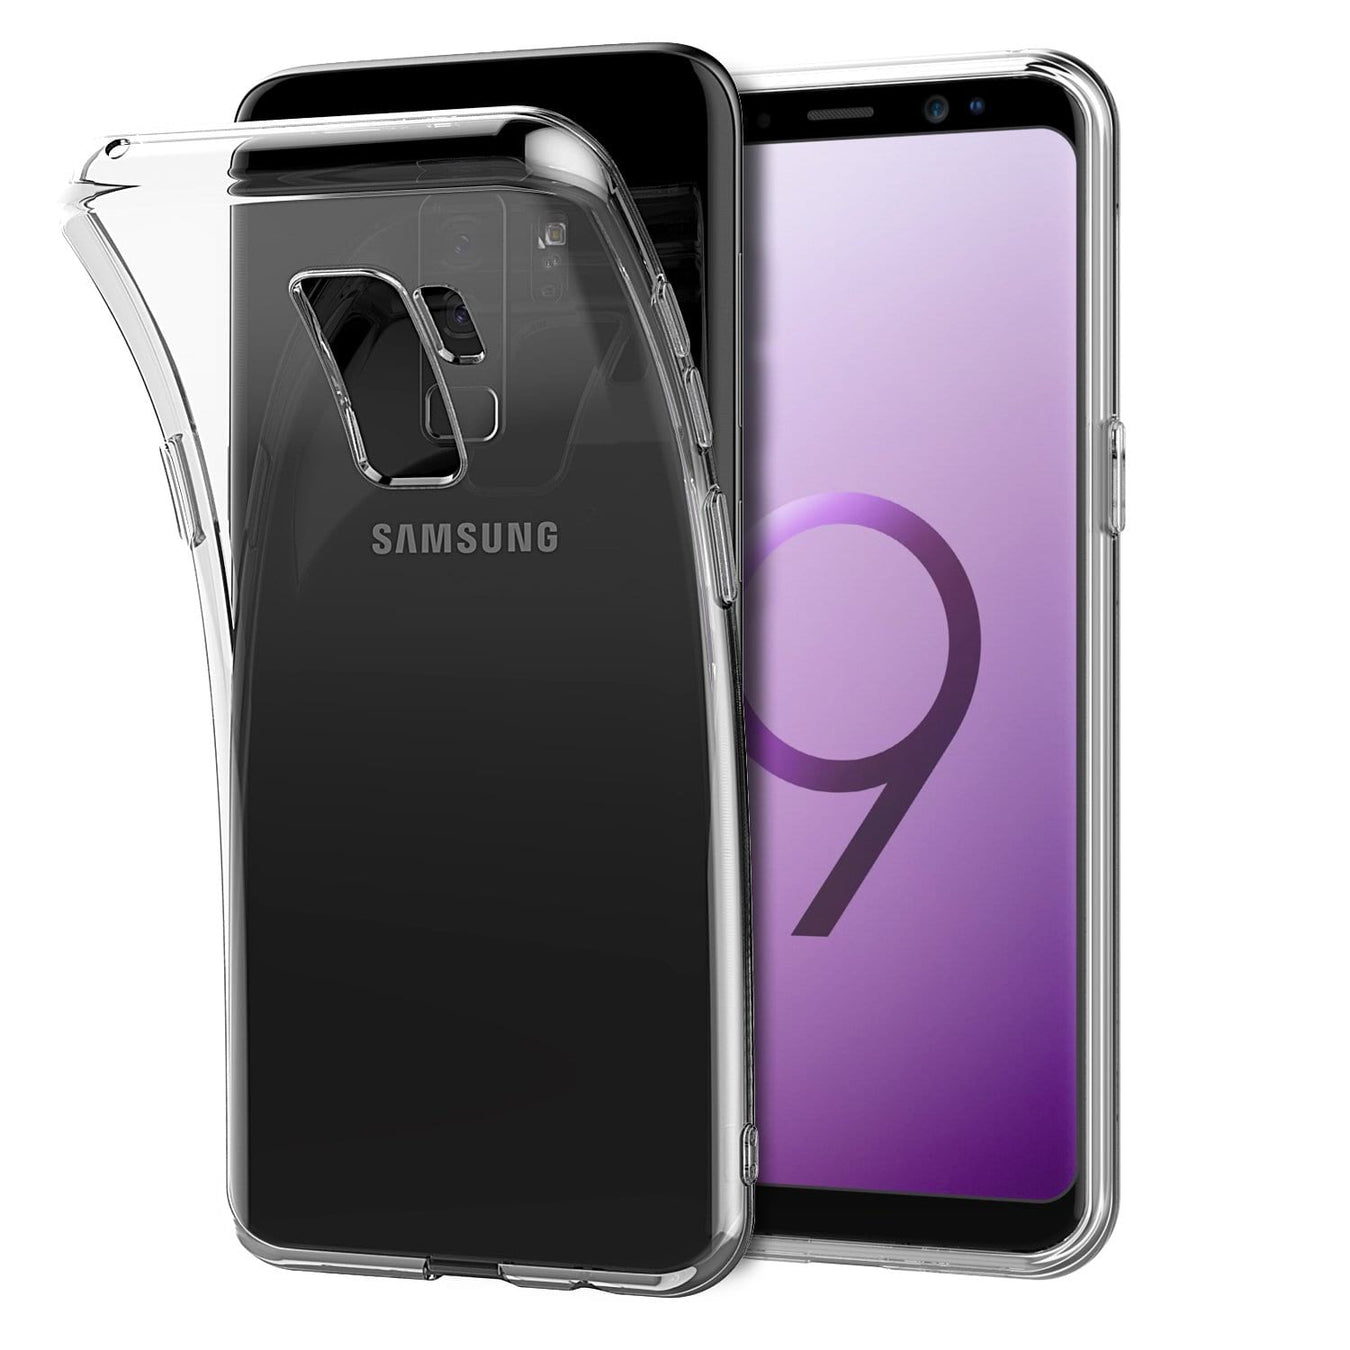 For Galaxy S9 and S9+